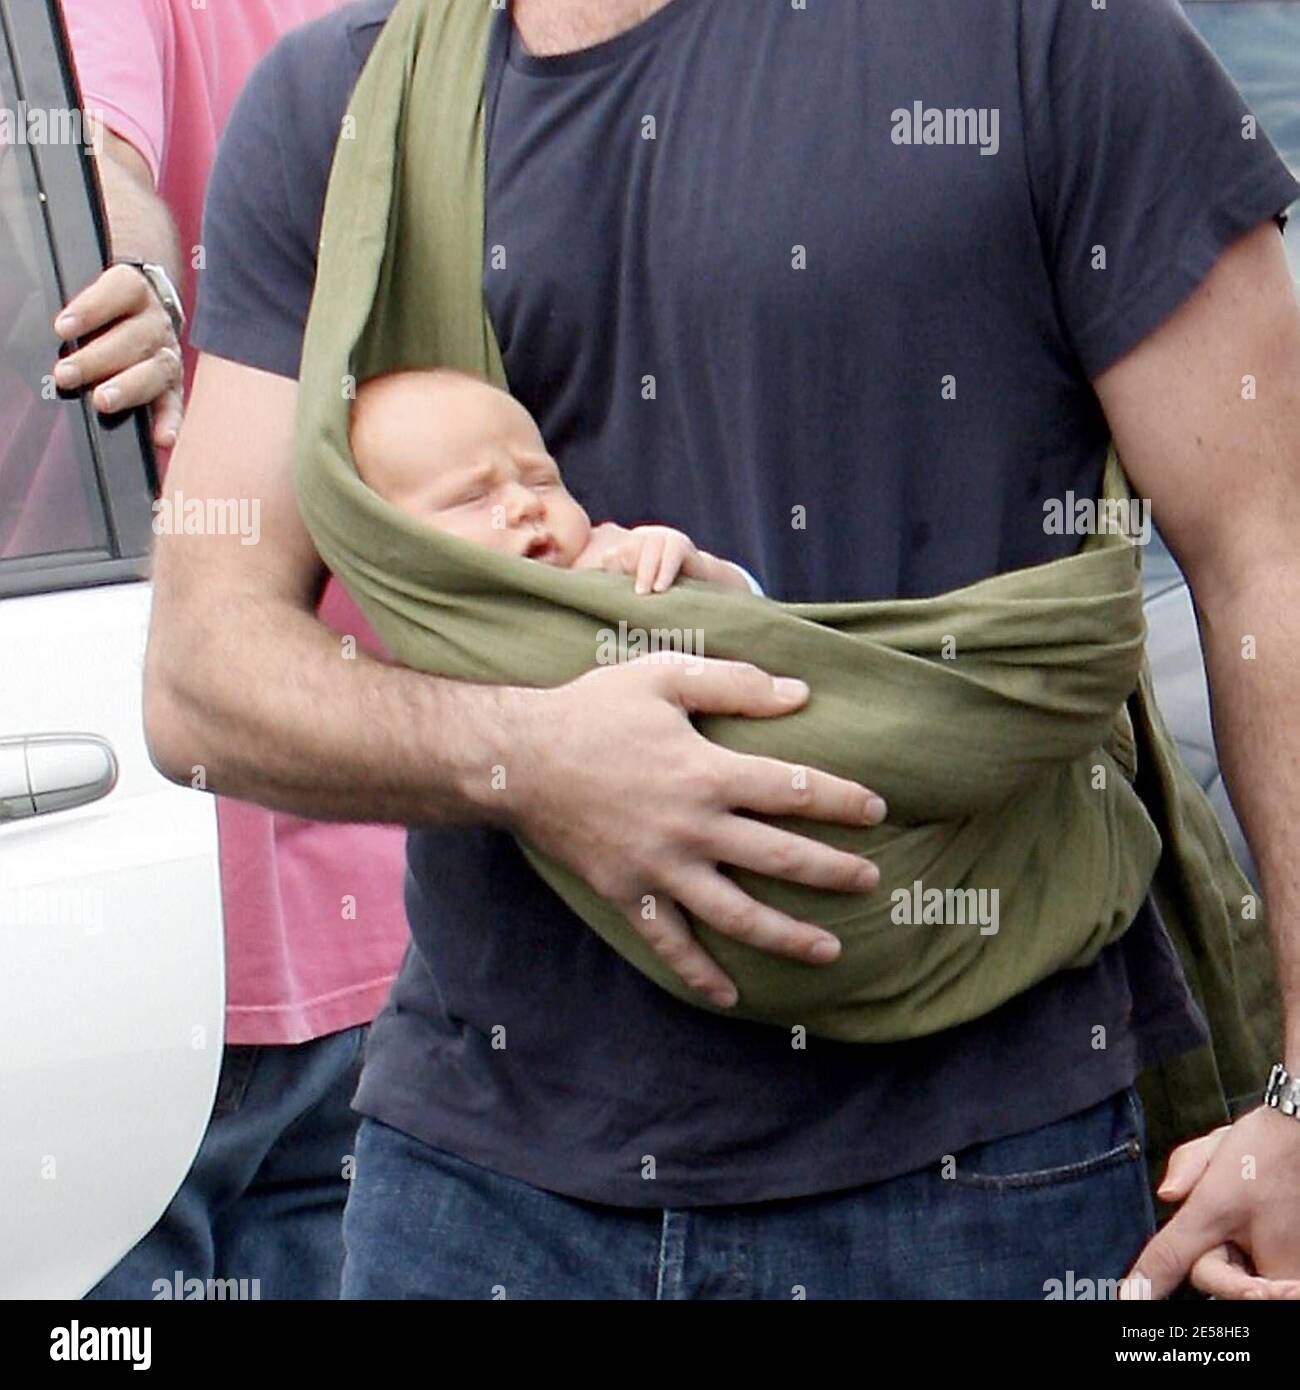 Naomi Watts, Liev Schreiber and newborn son Alexander Pete take a morning stroll to get some breakfast. Naomi and liev held hands as Liev cradled Alexander in a sling. Venice Beach, Calif. 8/25/07. [[mbp]] Stock Photo